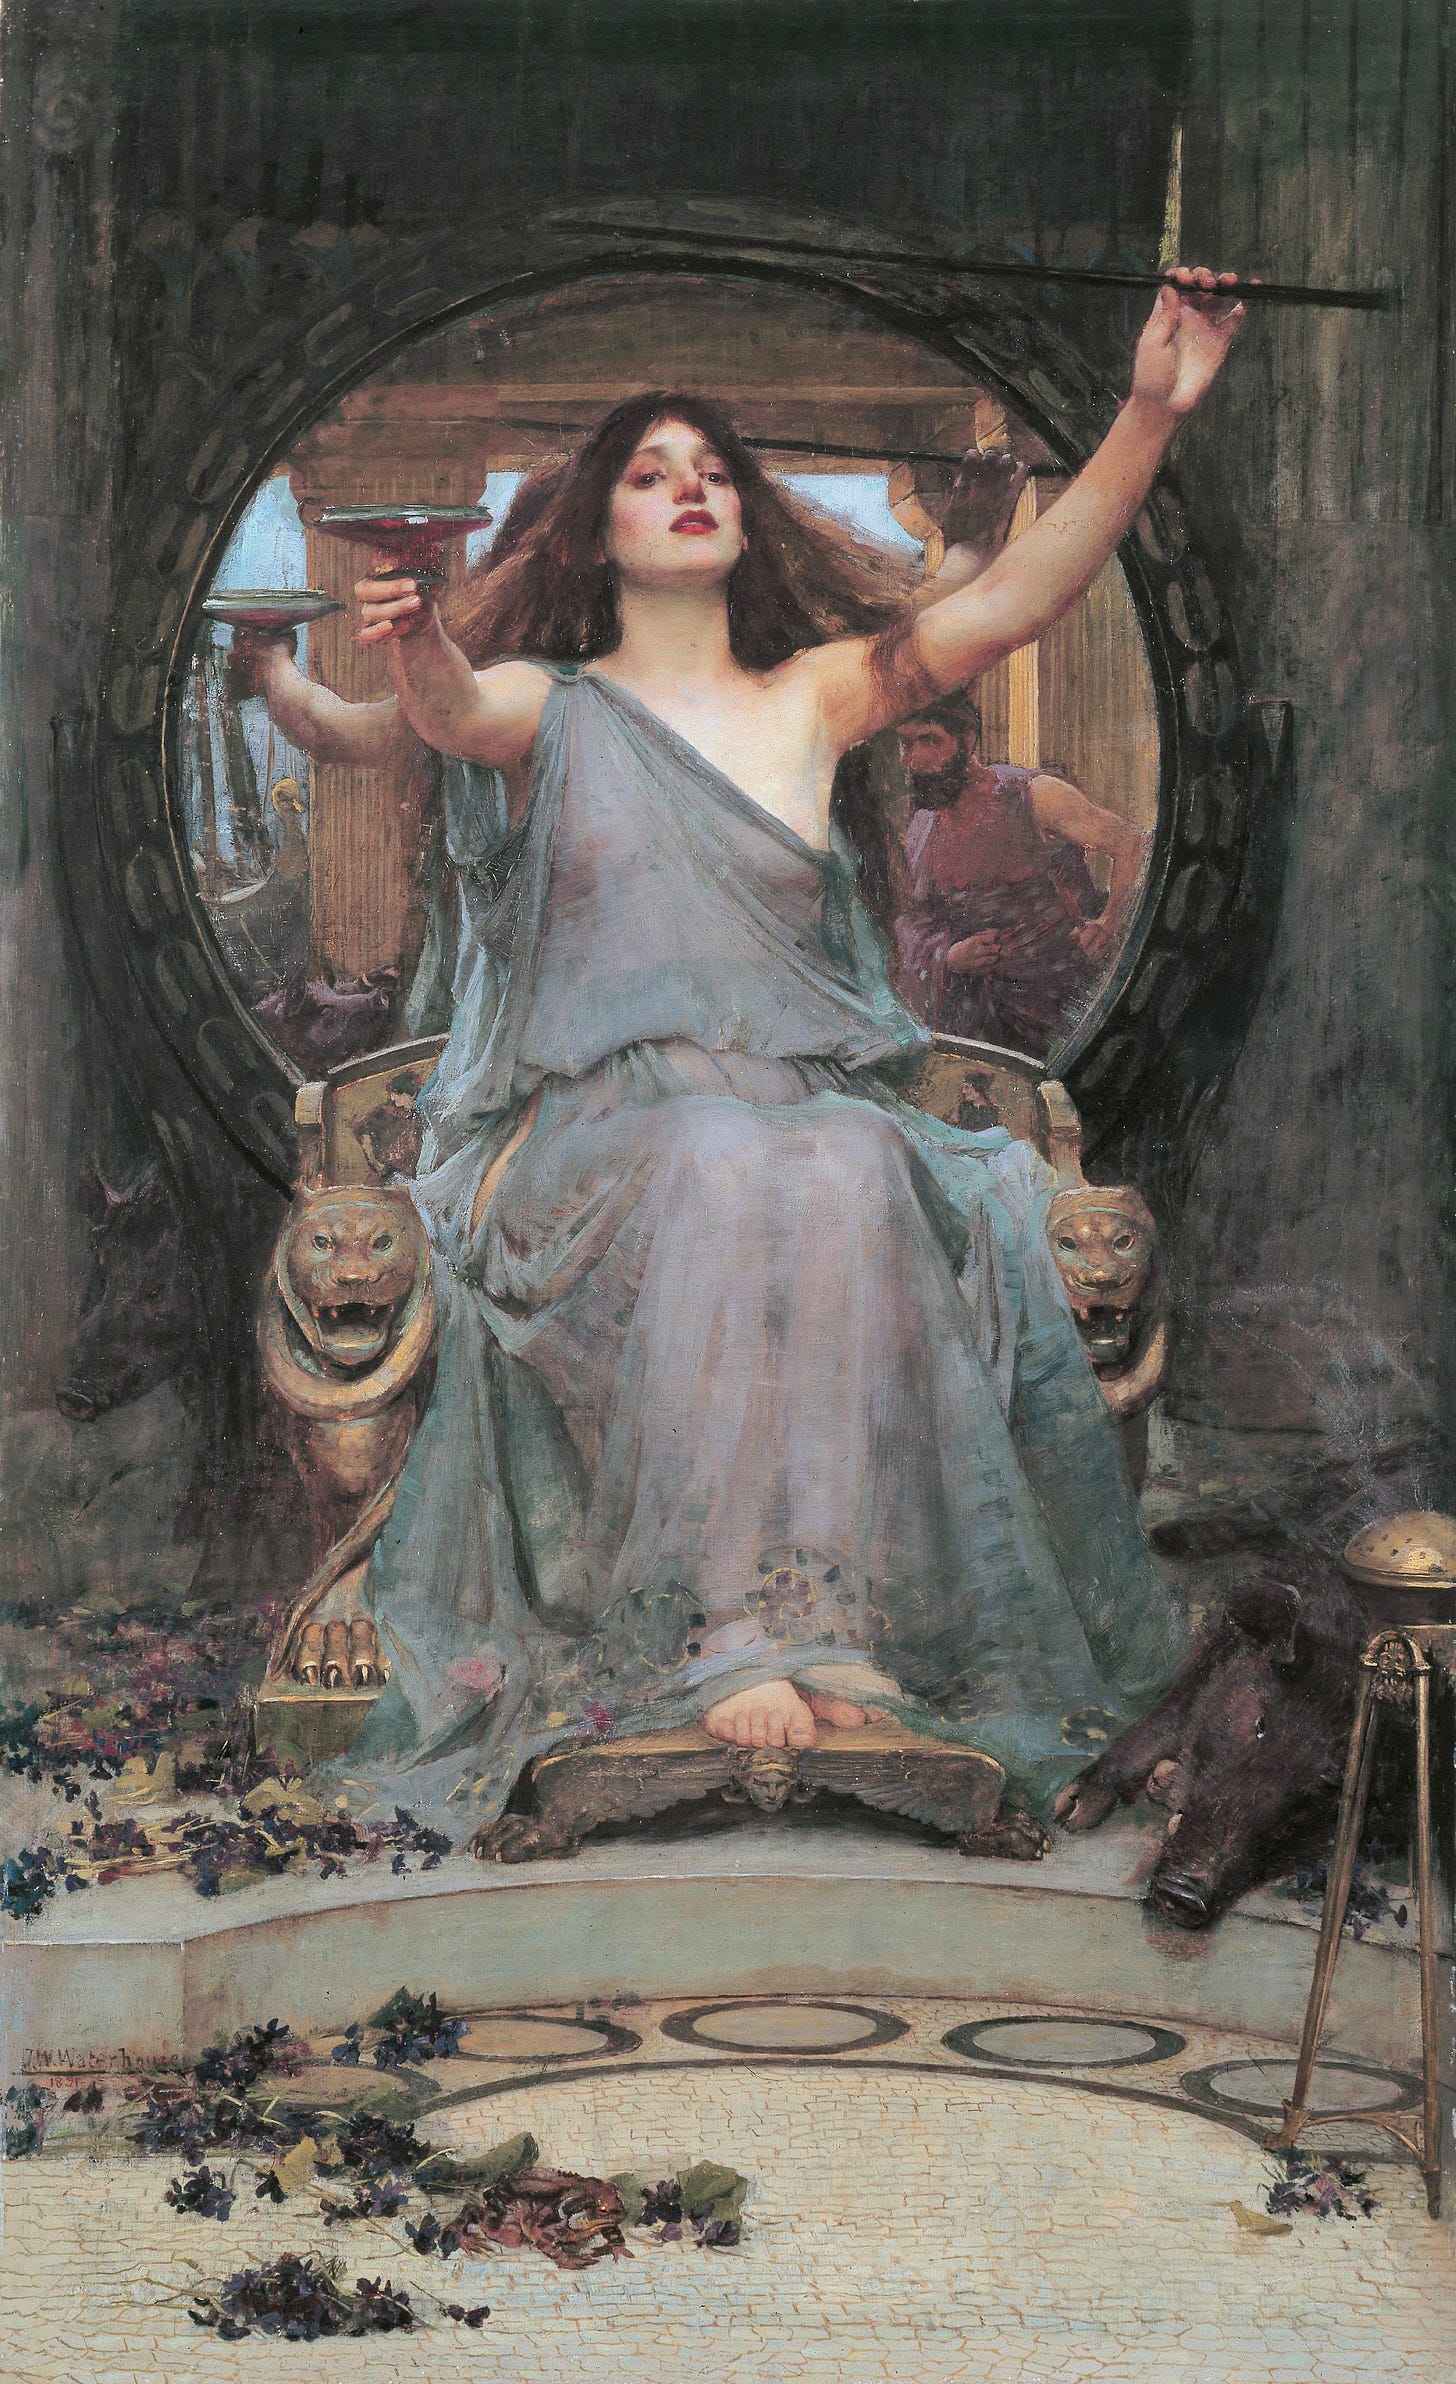 Circe Offering the Cup to Ulysses - Wikipedia